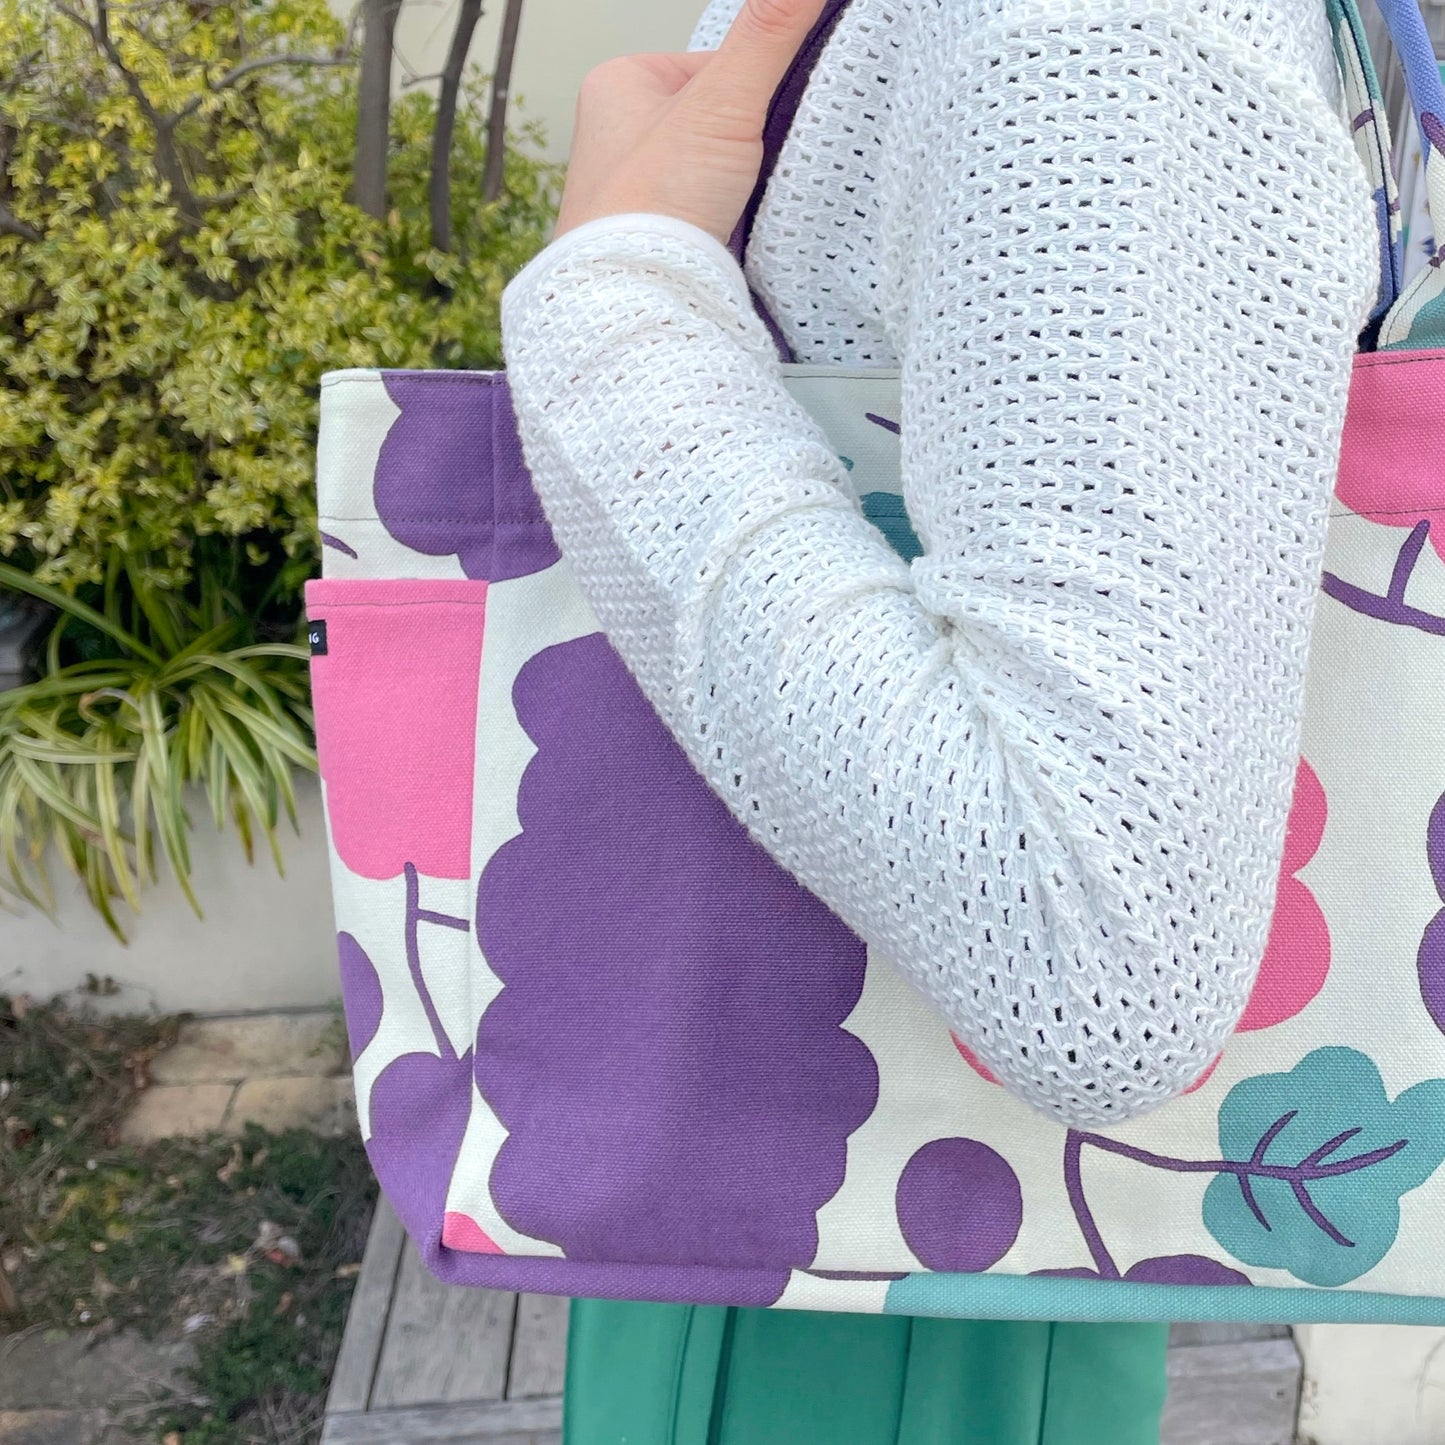 LAST1 ・Tote (M, with side pockets) “One grape?” Thank you_Tassel pattern